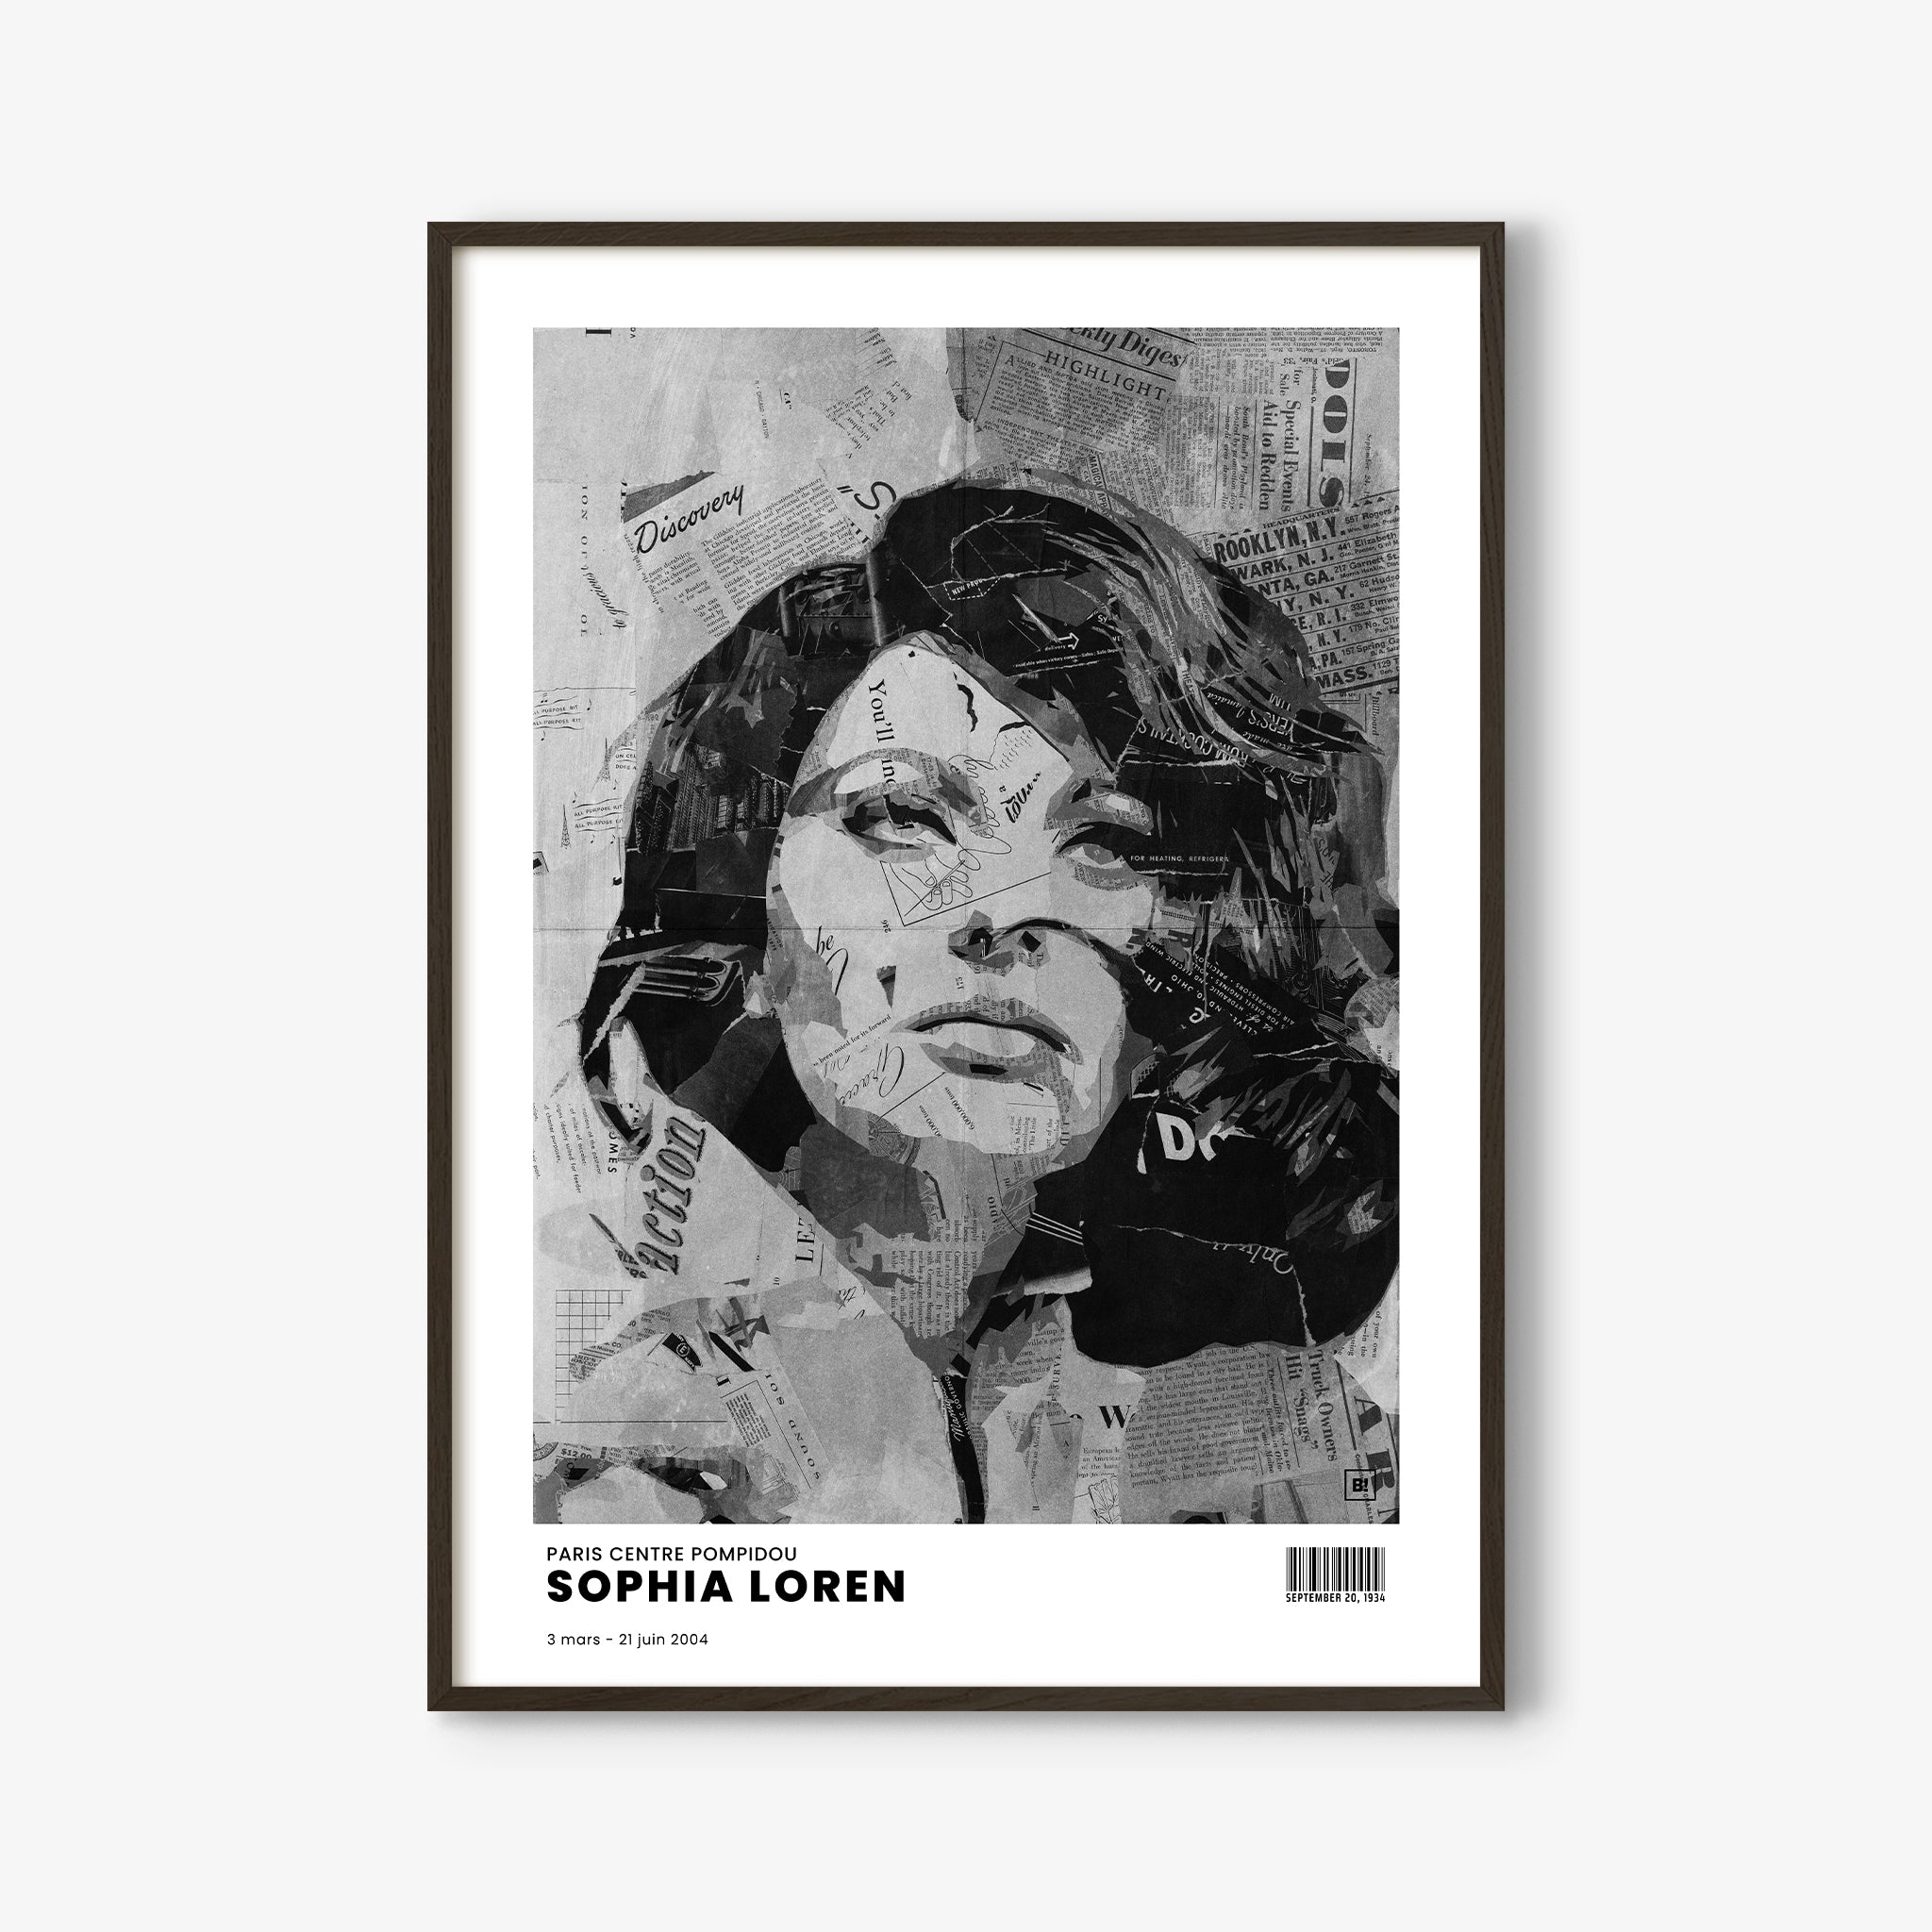 Be inspired by Iconic Sophia Loren Paris Centre Pompidou Exhibition Art Print. The artwork is presented in a black oak frame that captures its timeless beauty in every detail.